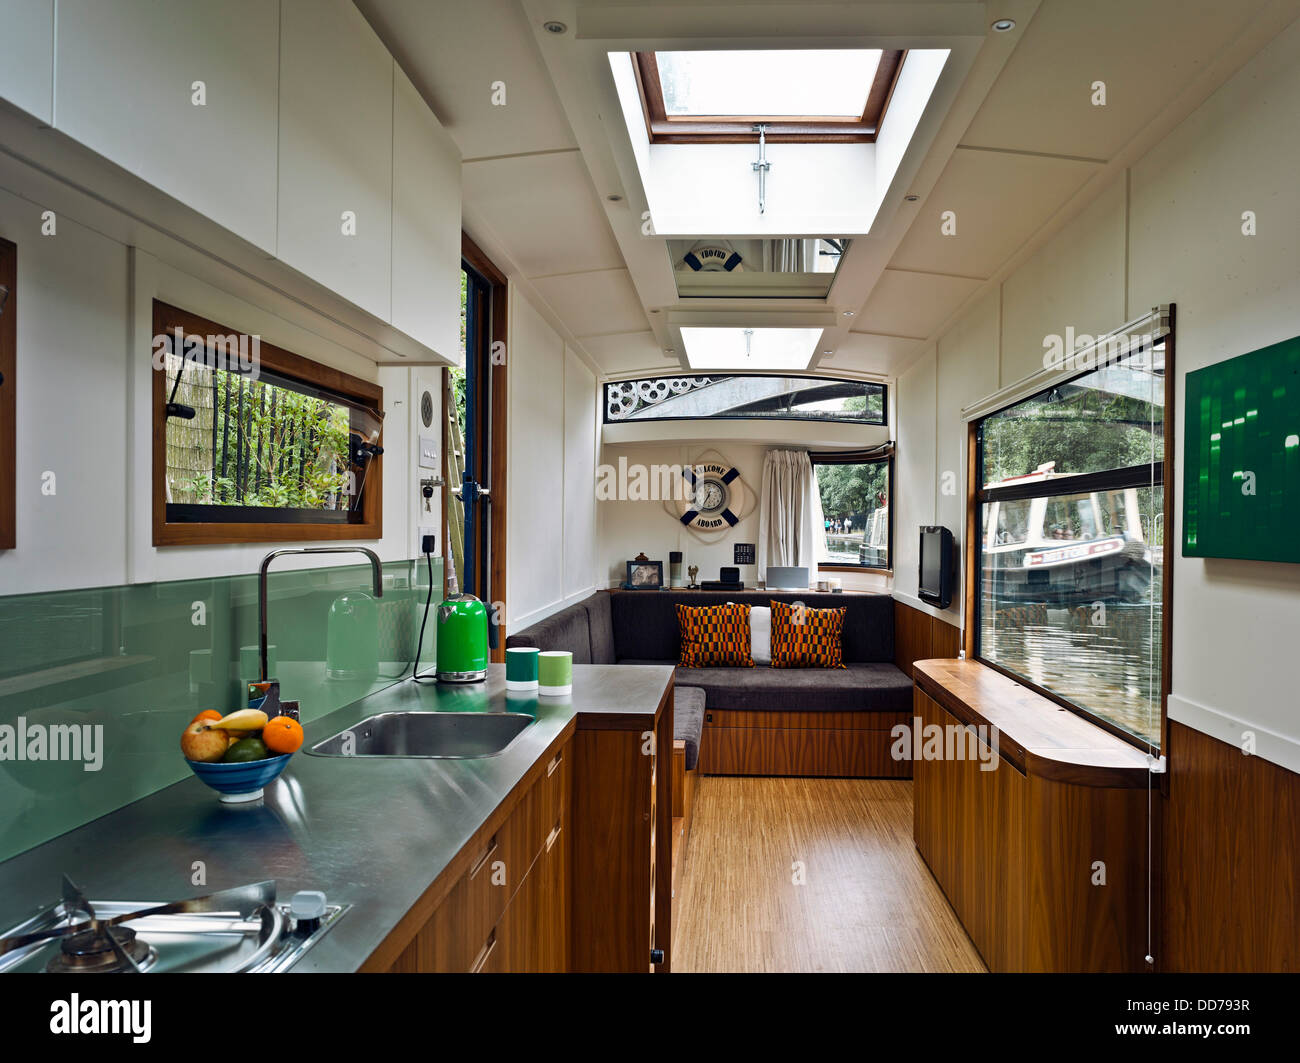 Narrowboat, London, United Kingdom. Architect: Pete Young, 2013. Interior towards seating/fold away bed with passing boat on the Stock Photo